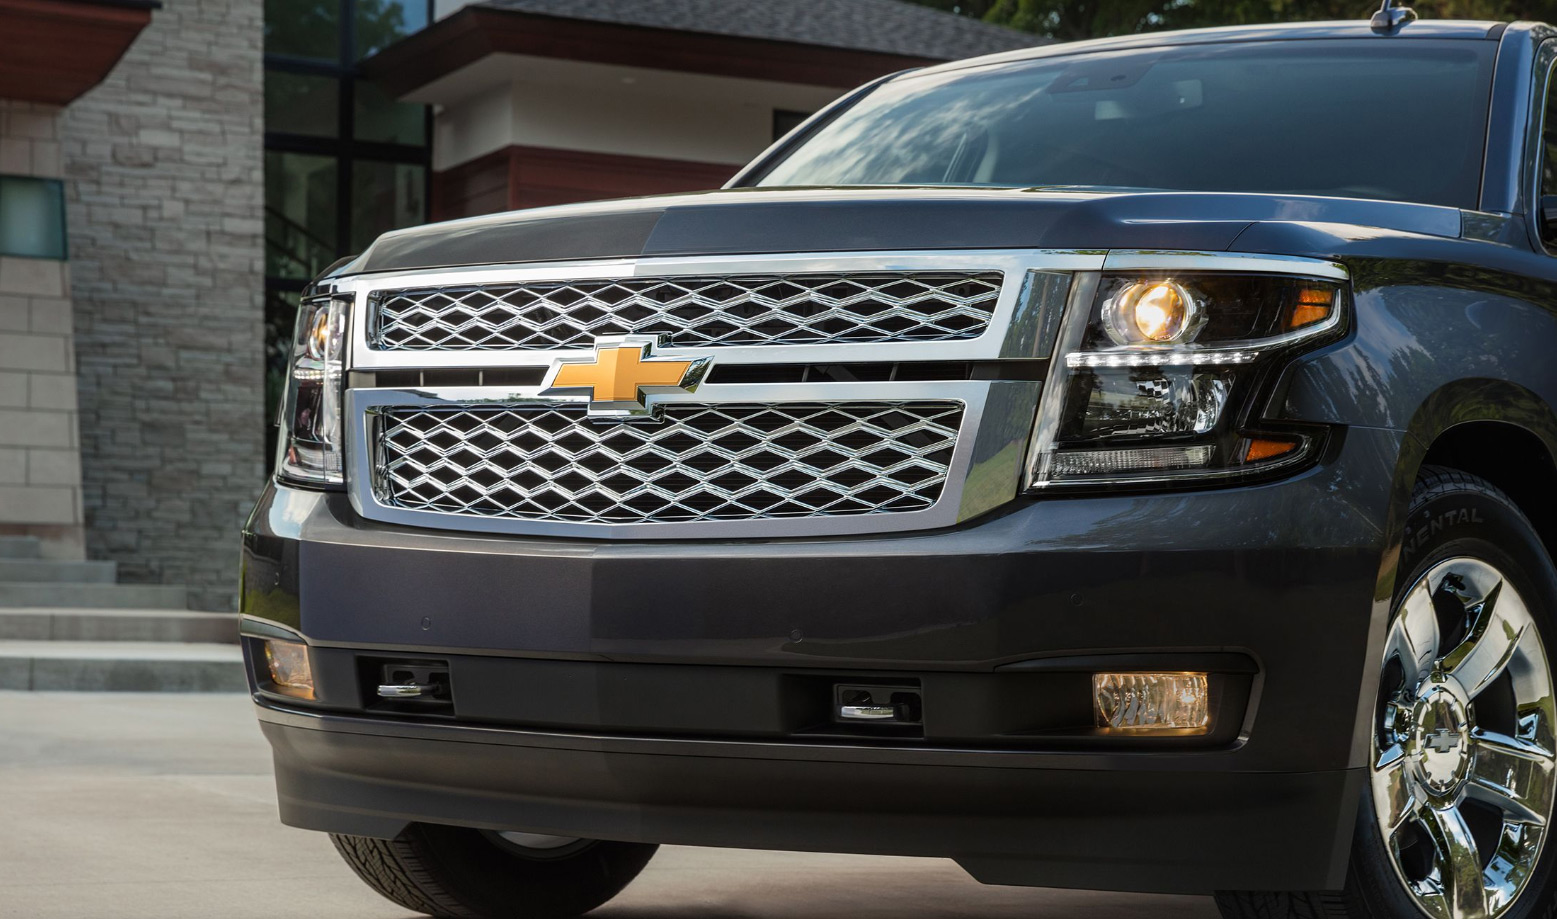 Valley Chevy - 2019 Suburban RST Pictures & Specs - Front End